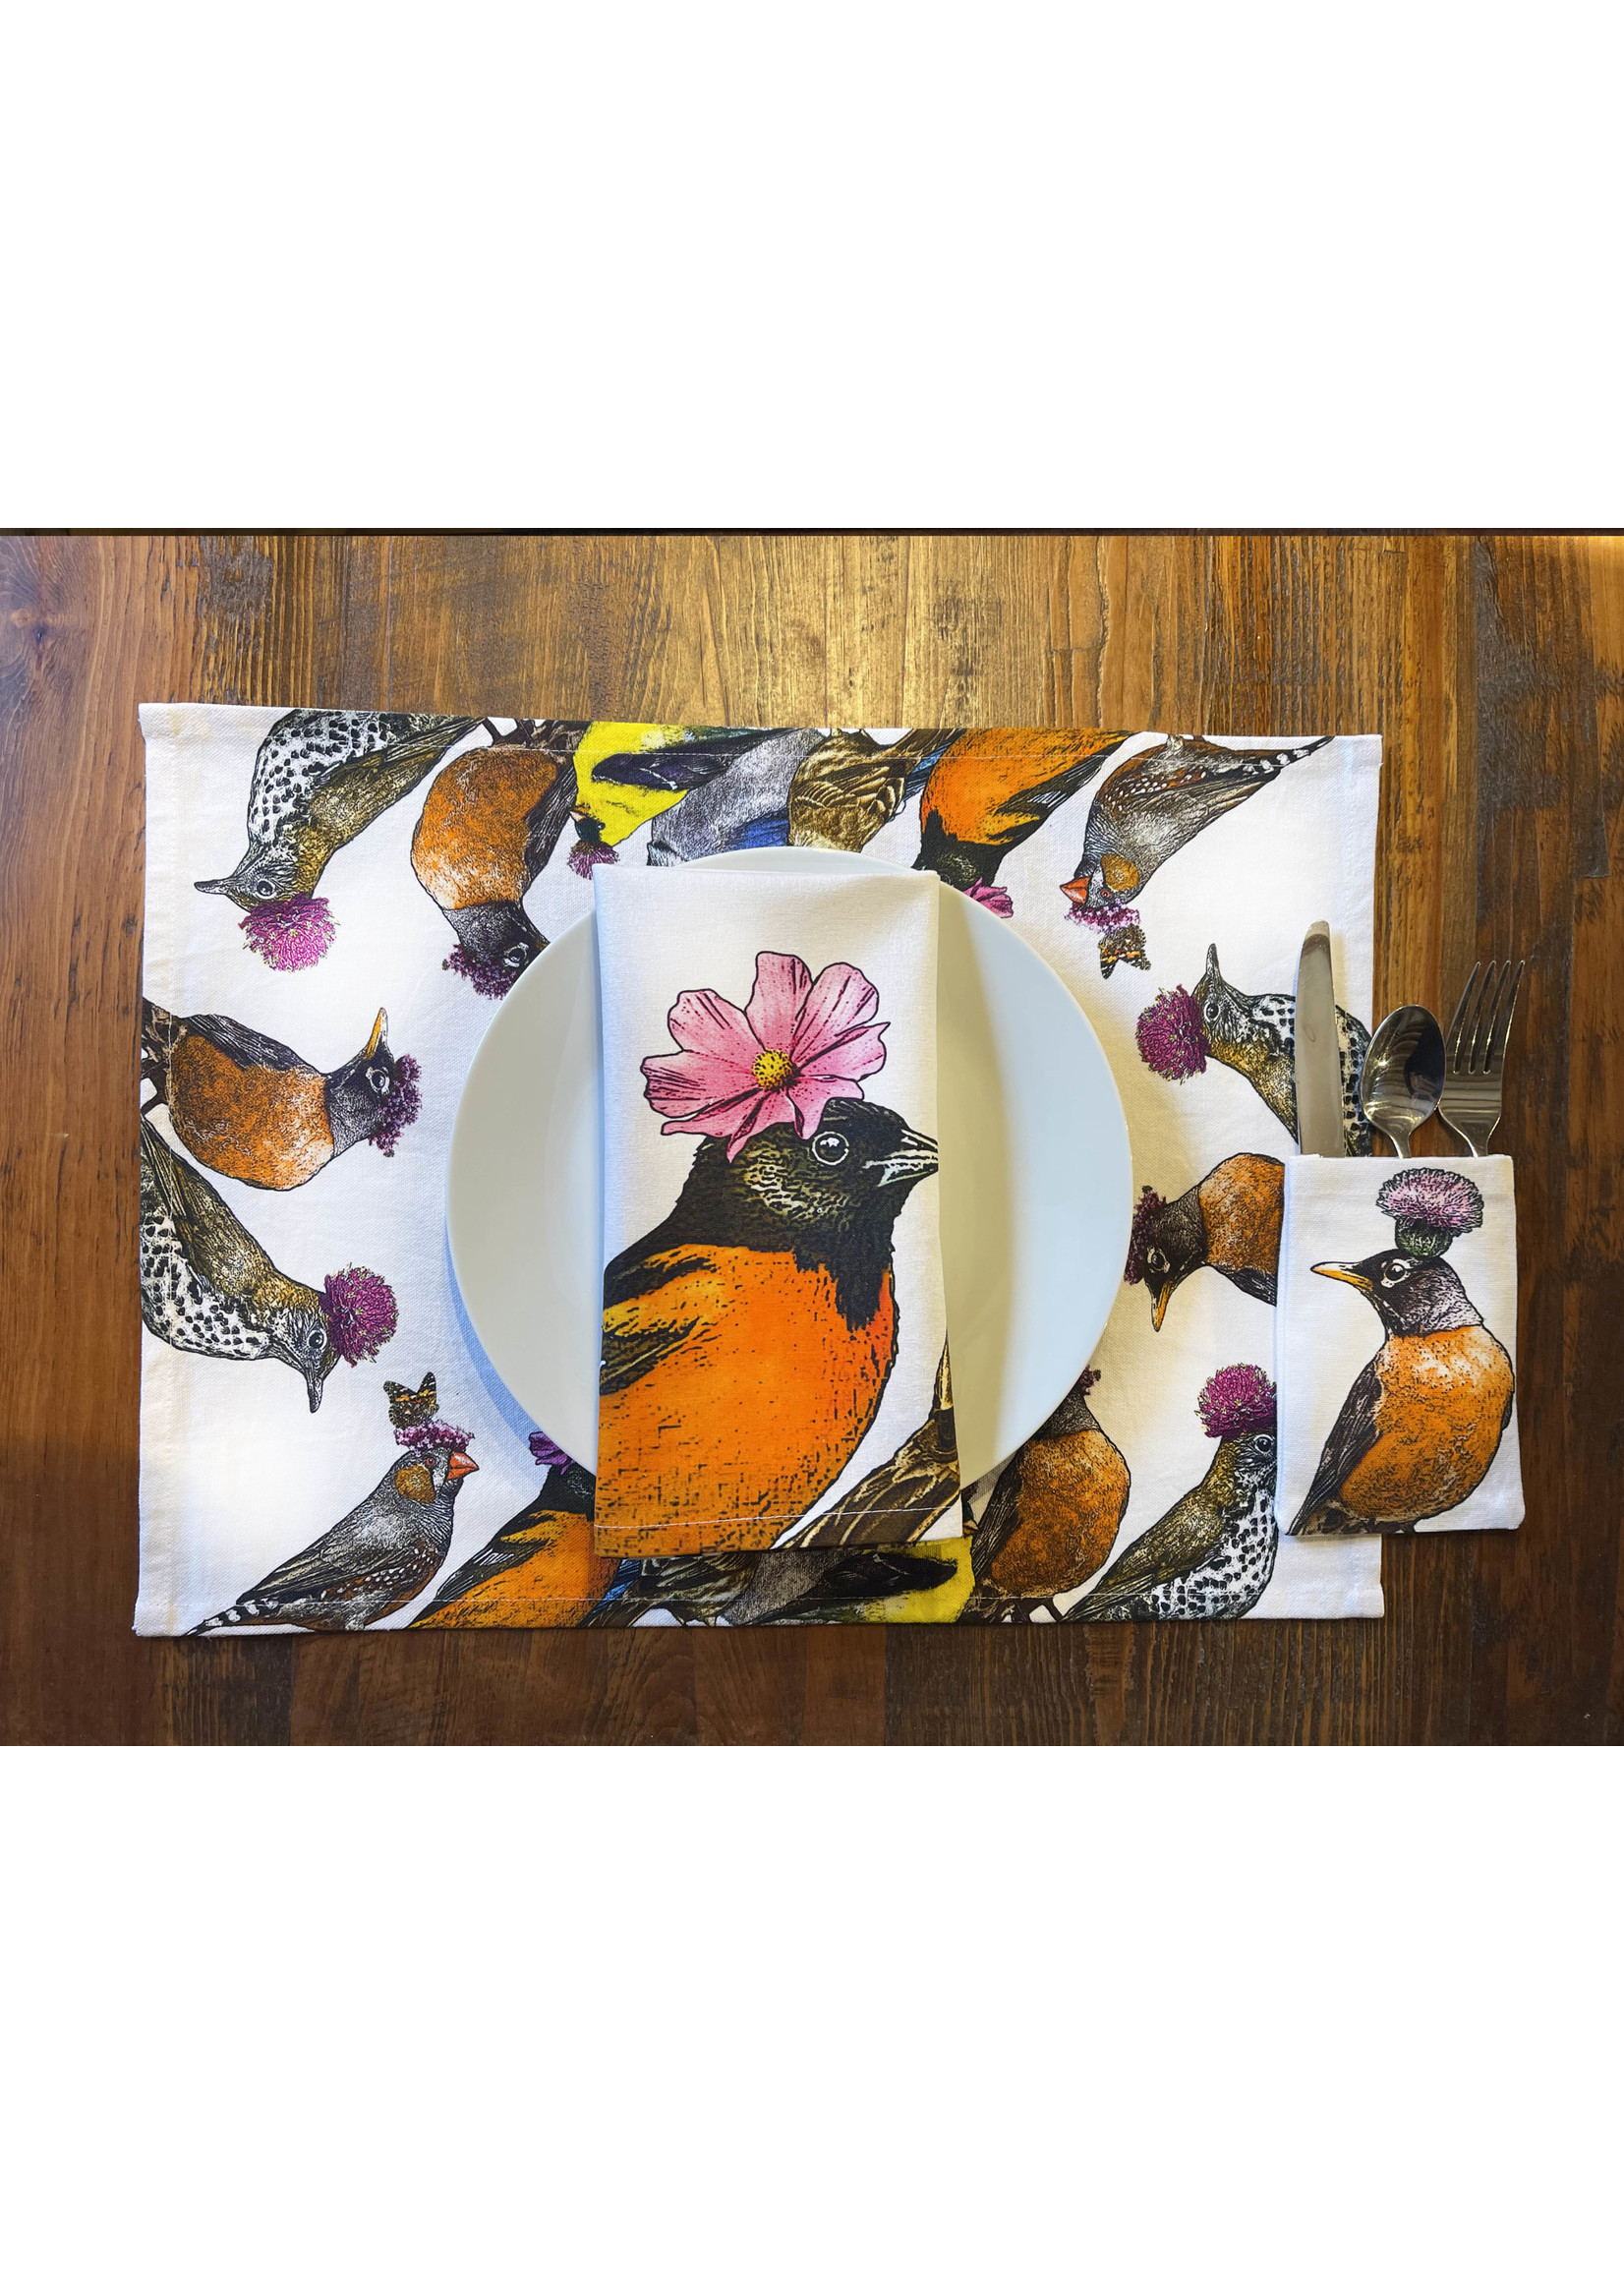 Alphie and Ollie small birds with purple flowers placemat/napkin 14 x 20 inches